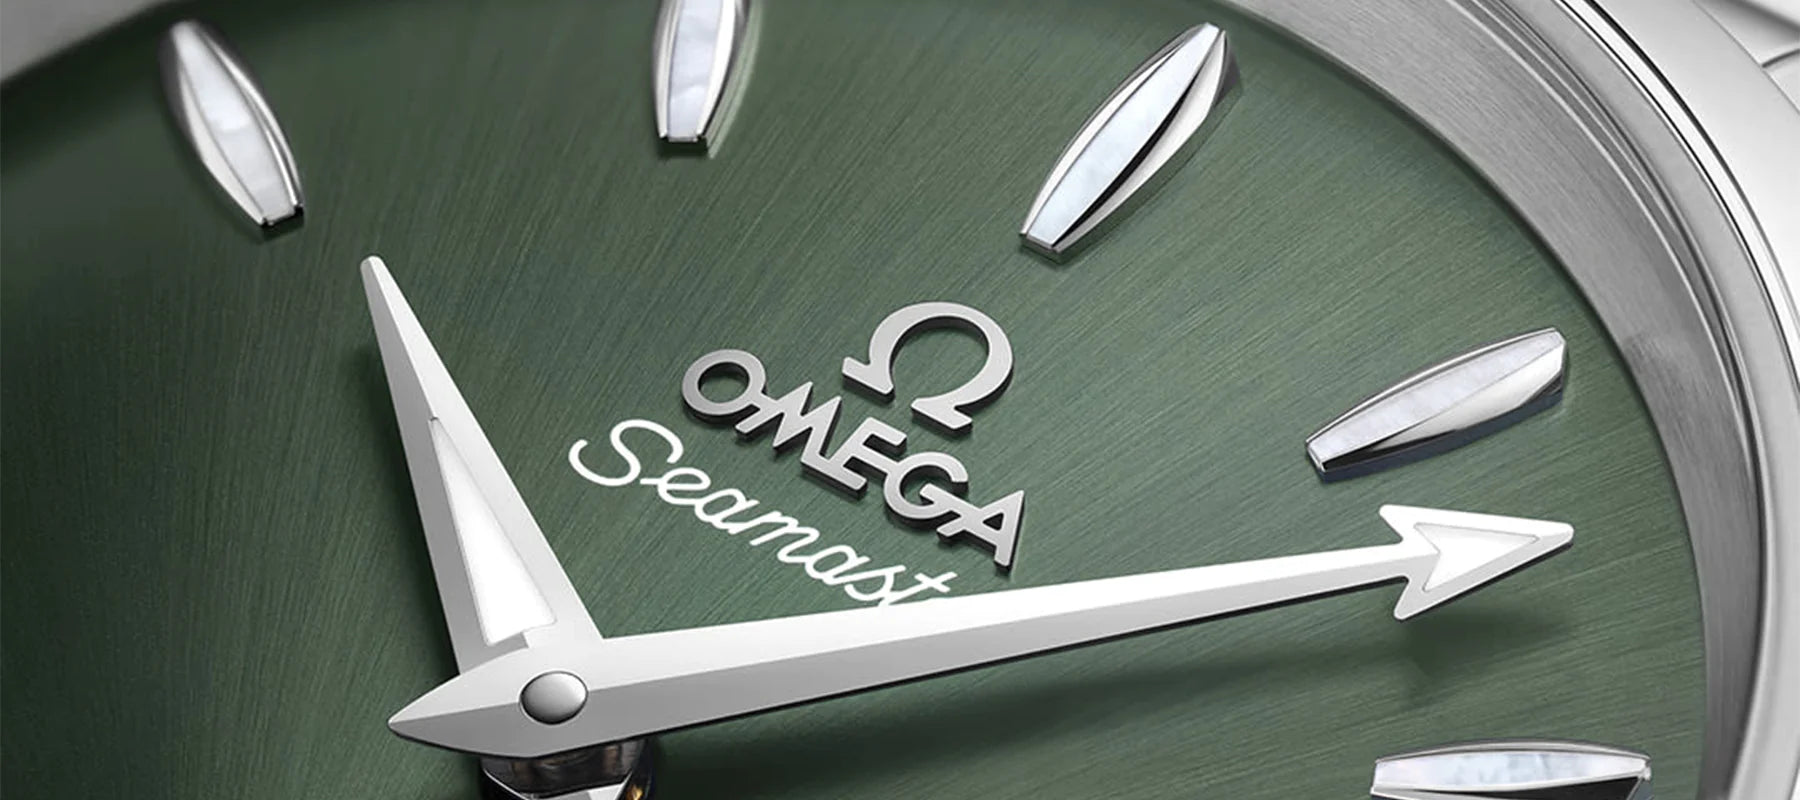 What Makes the Latest Omega Watches Stand Out?